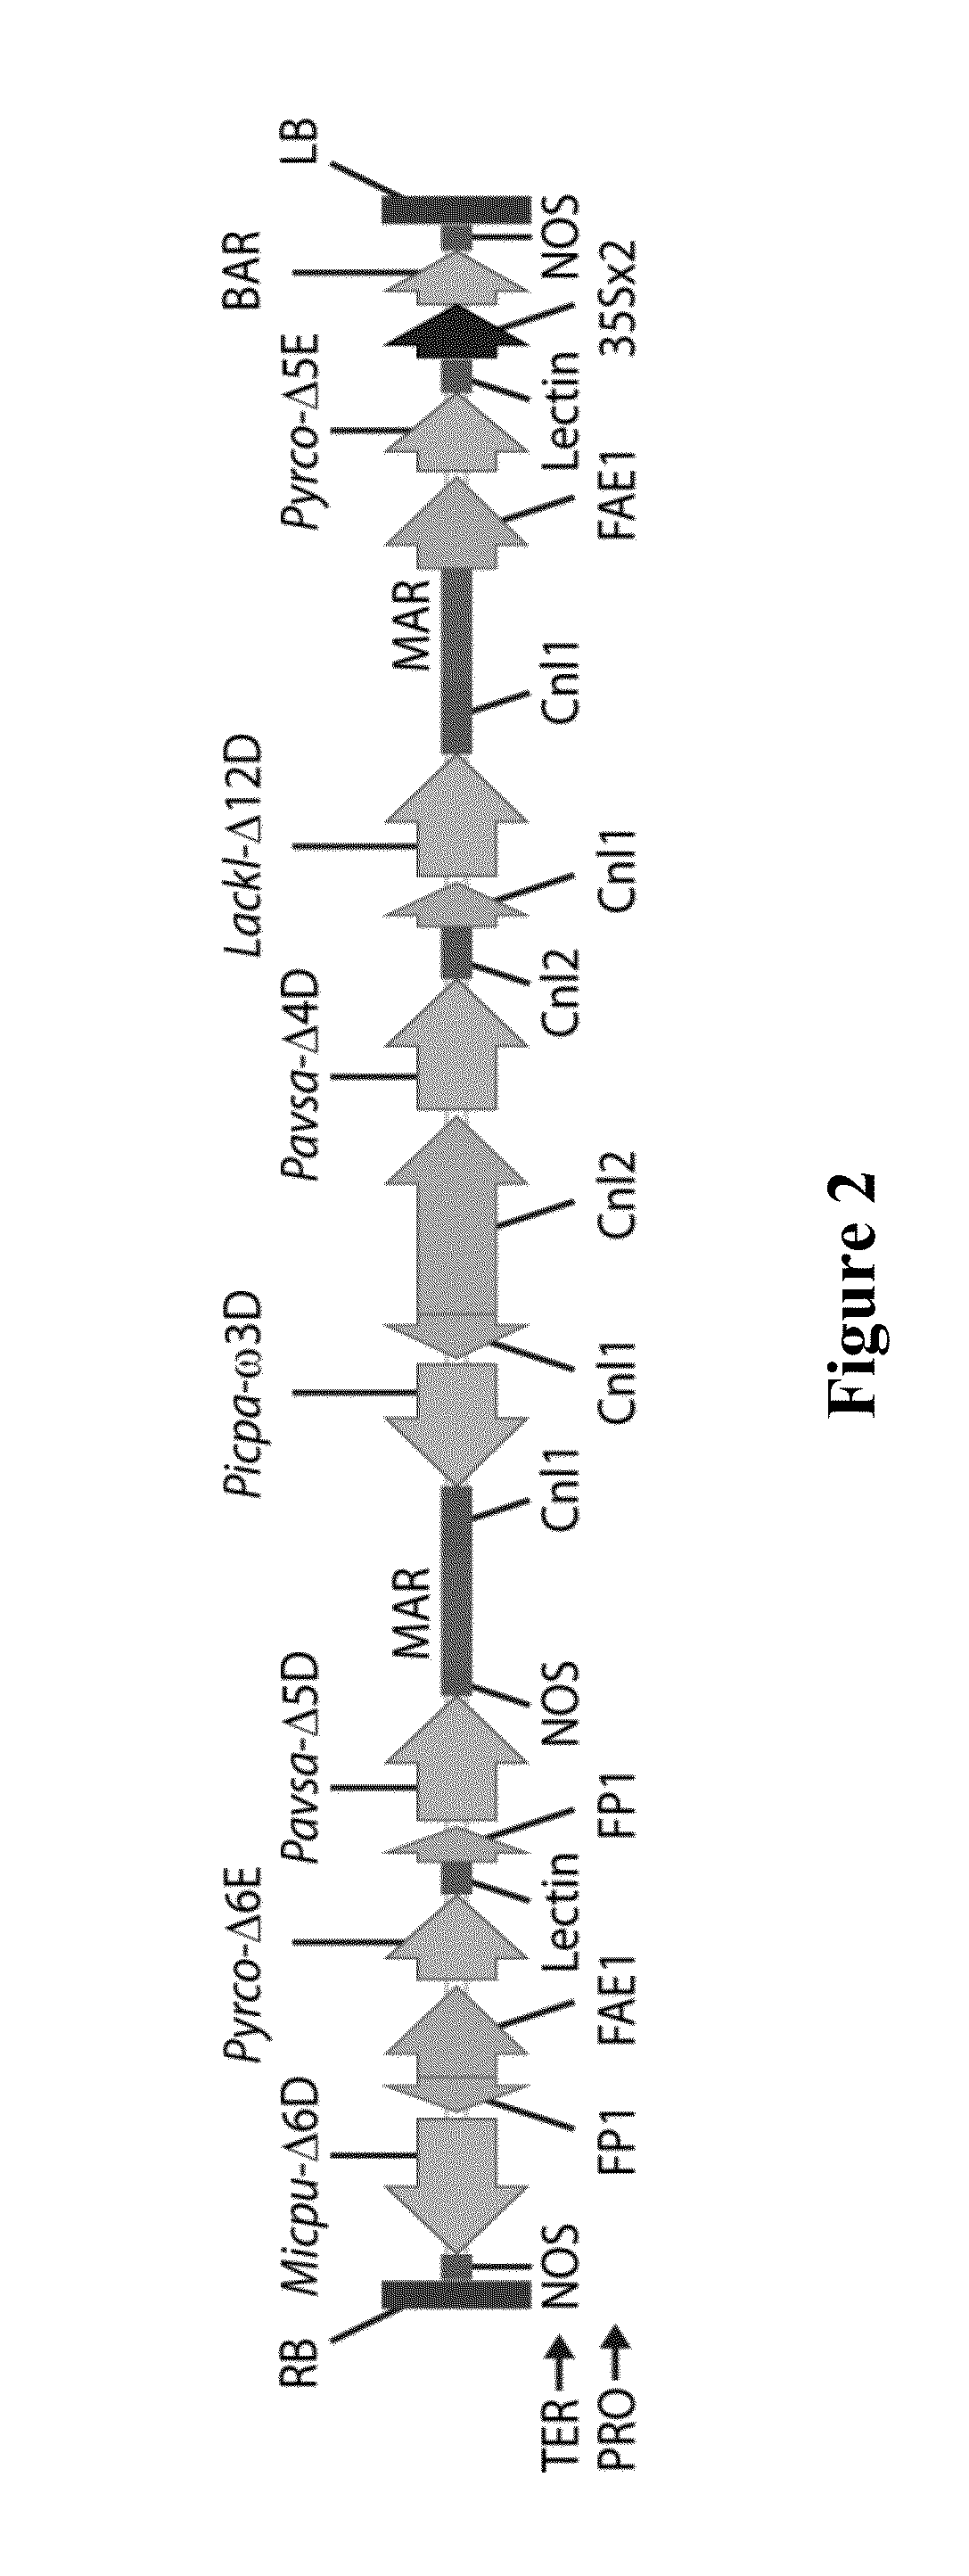 Process for producing ethyl esters of polyunsaturated fatty acids